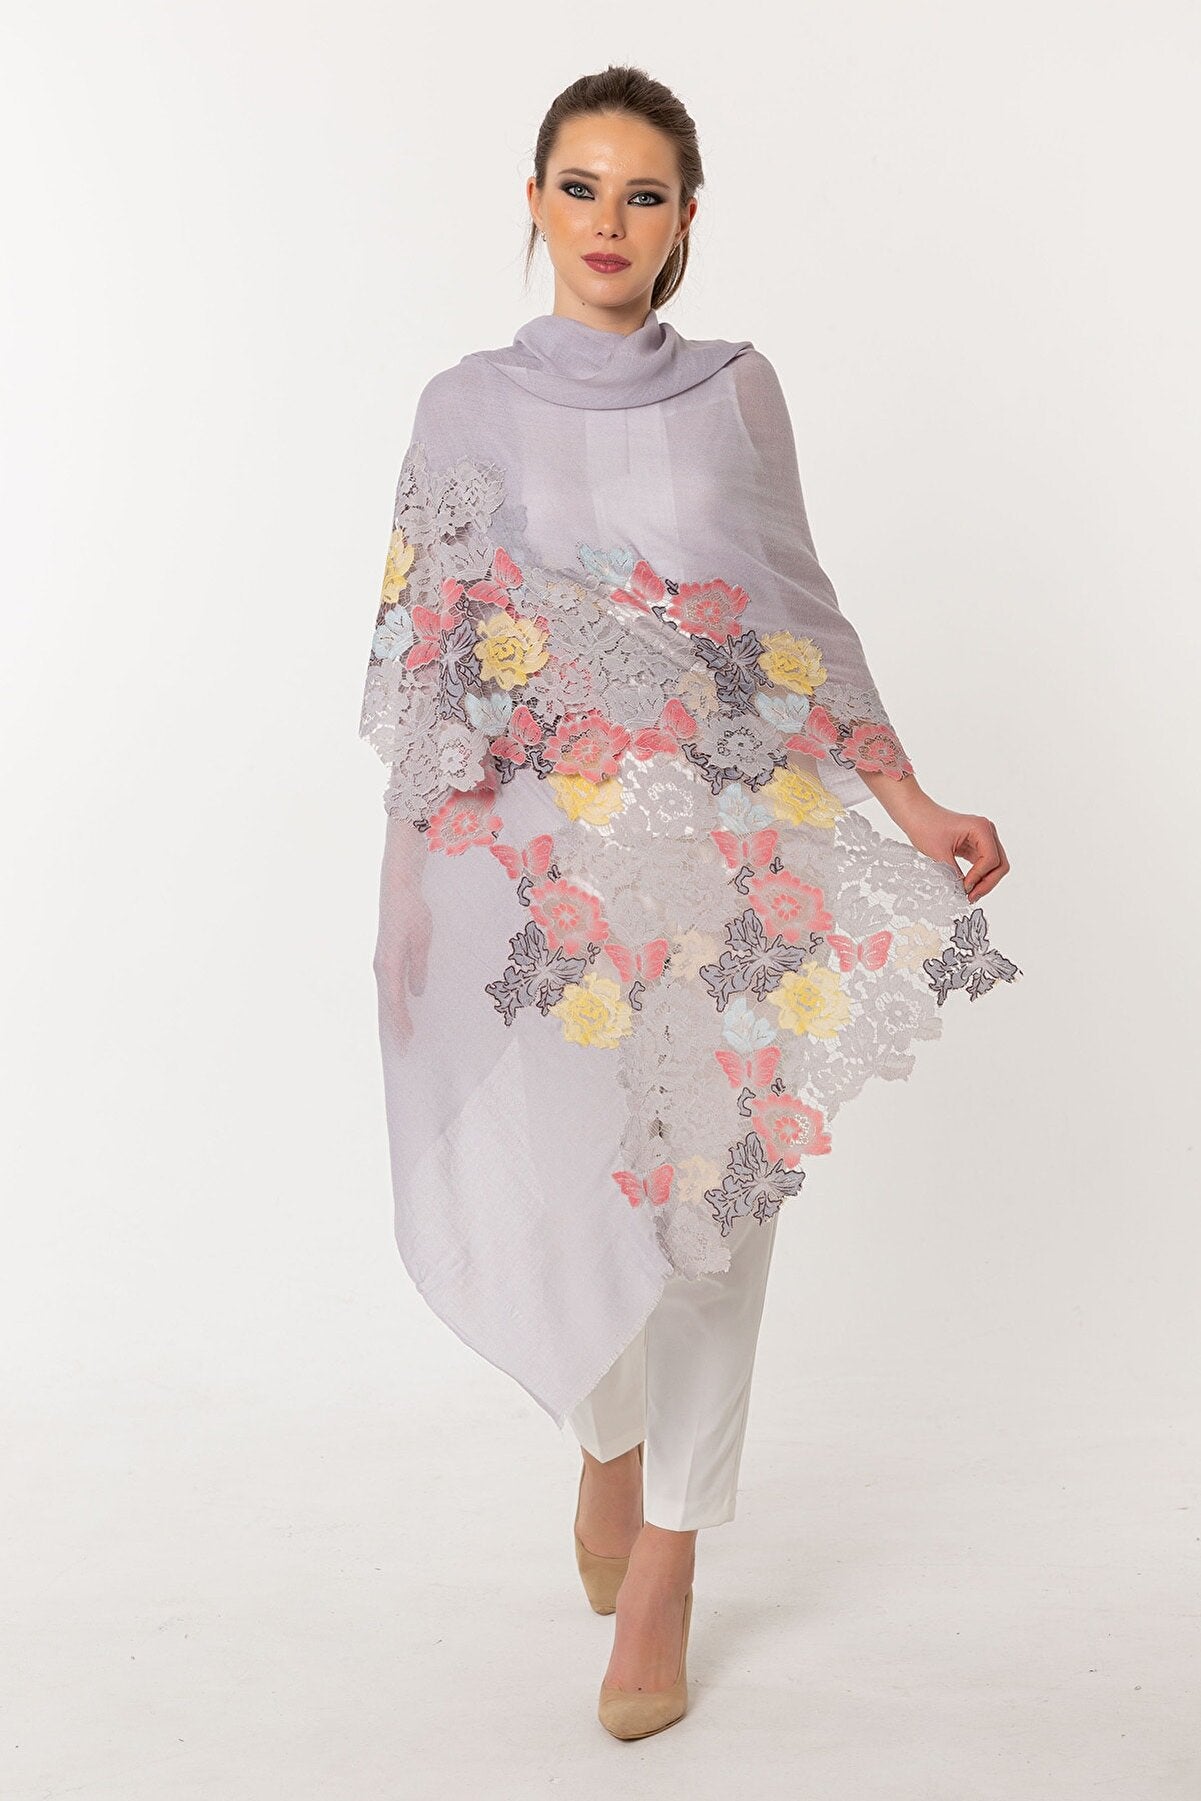 French Lace Cashmere Rose Shawl - Gray Rose